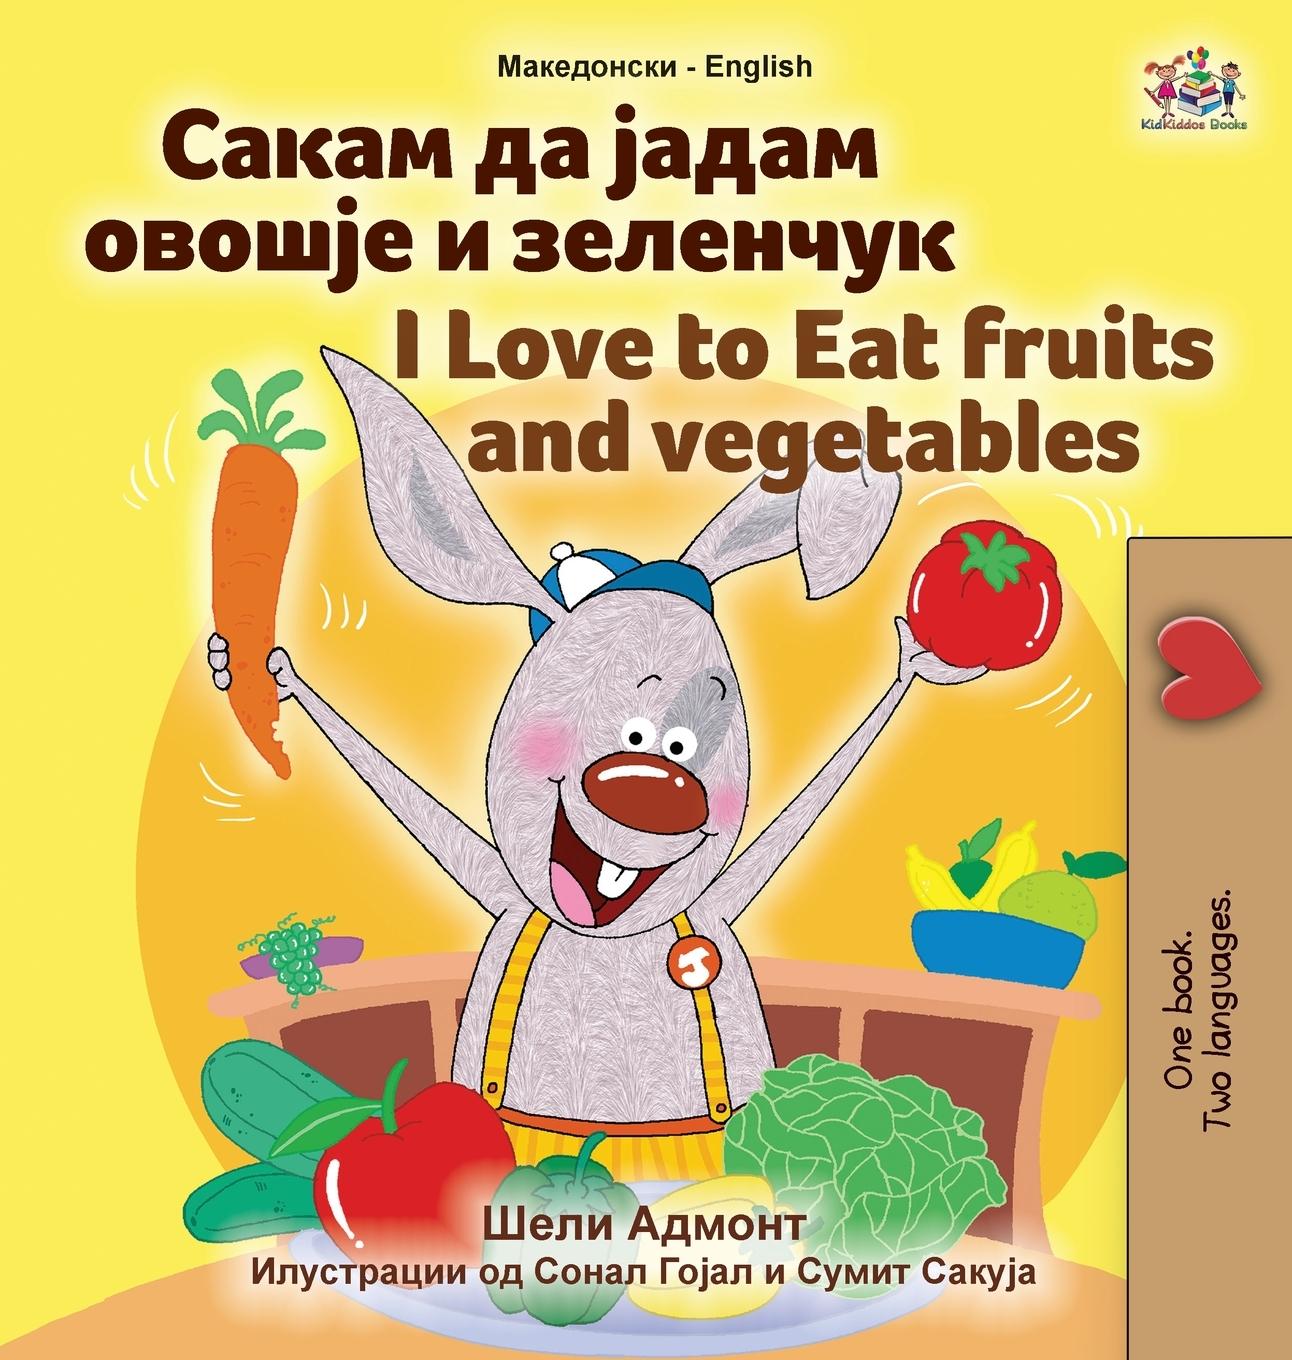 Könyv I Love to Eat Fruits and Vegetables (Macedonian English Bilingual Book for Kids) Kidkiddos Books